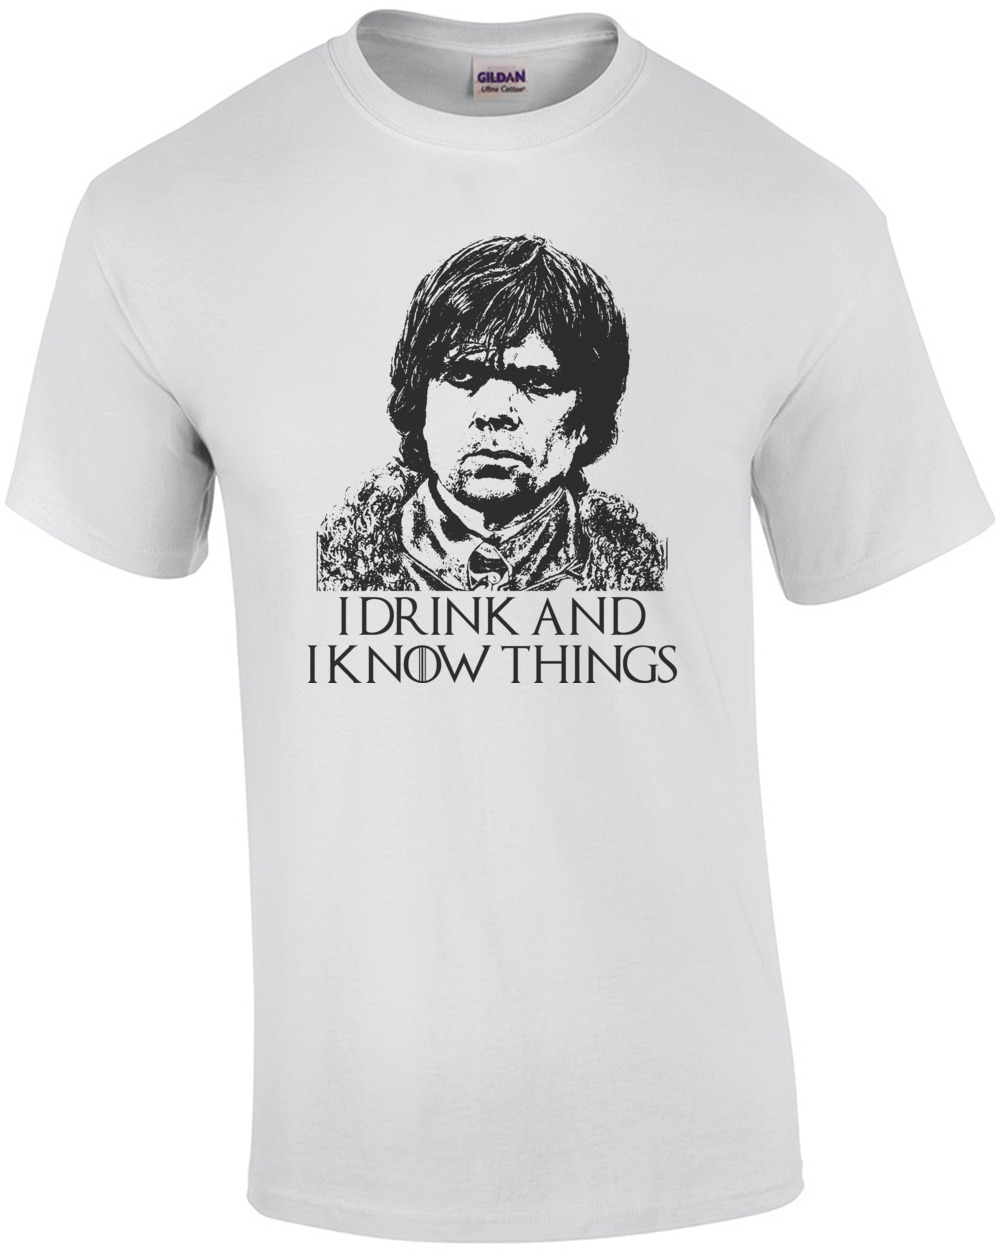 I DRINK AND I KNOW THINGS Mens game T Shirt S-5XL BIG funny thrones of tyrion